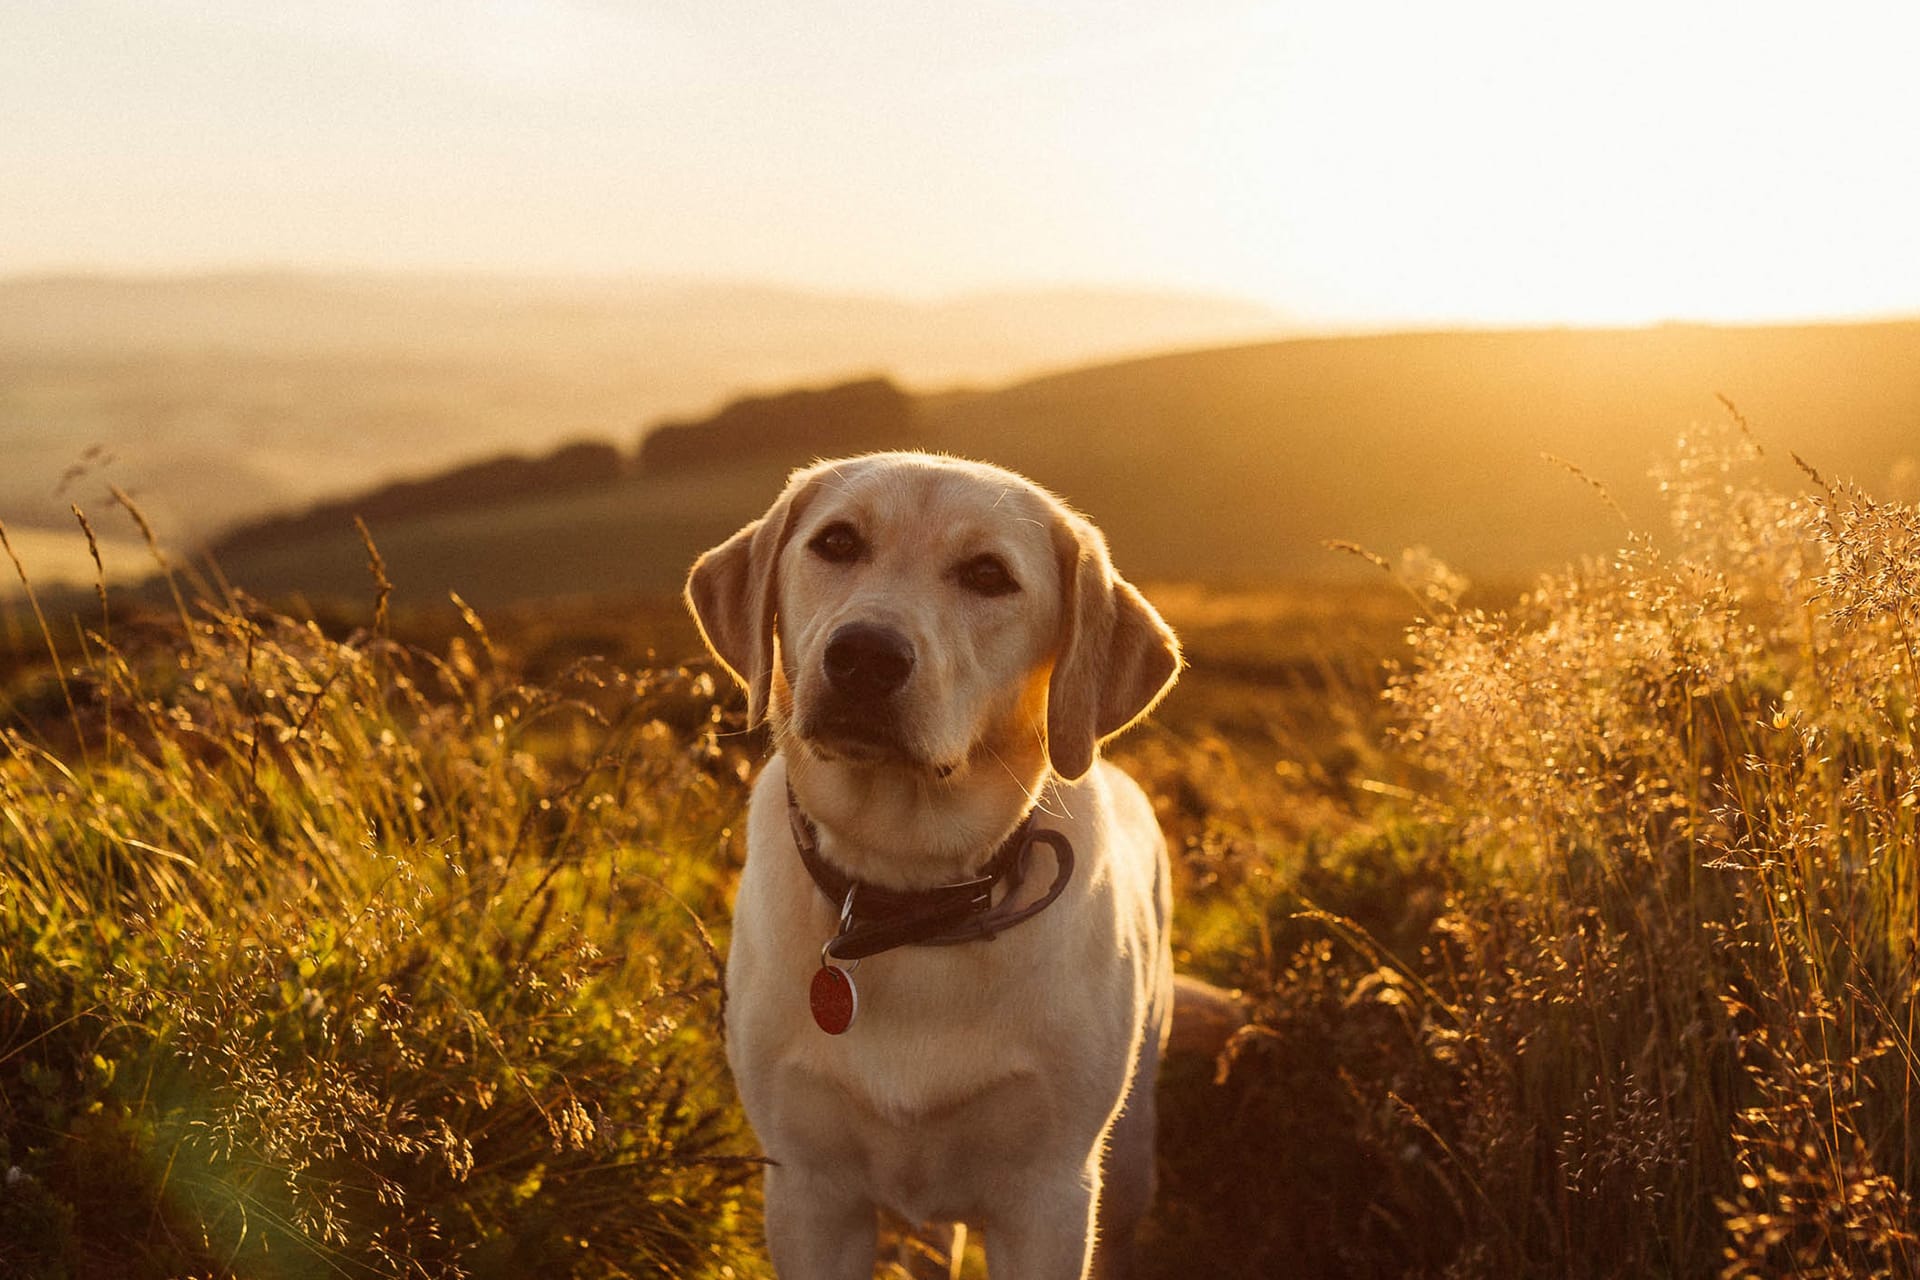 Image shows golden retriever at sunset